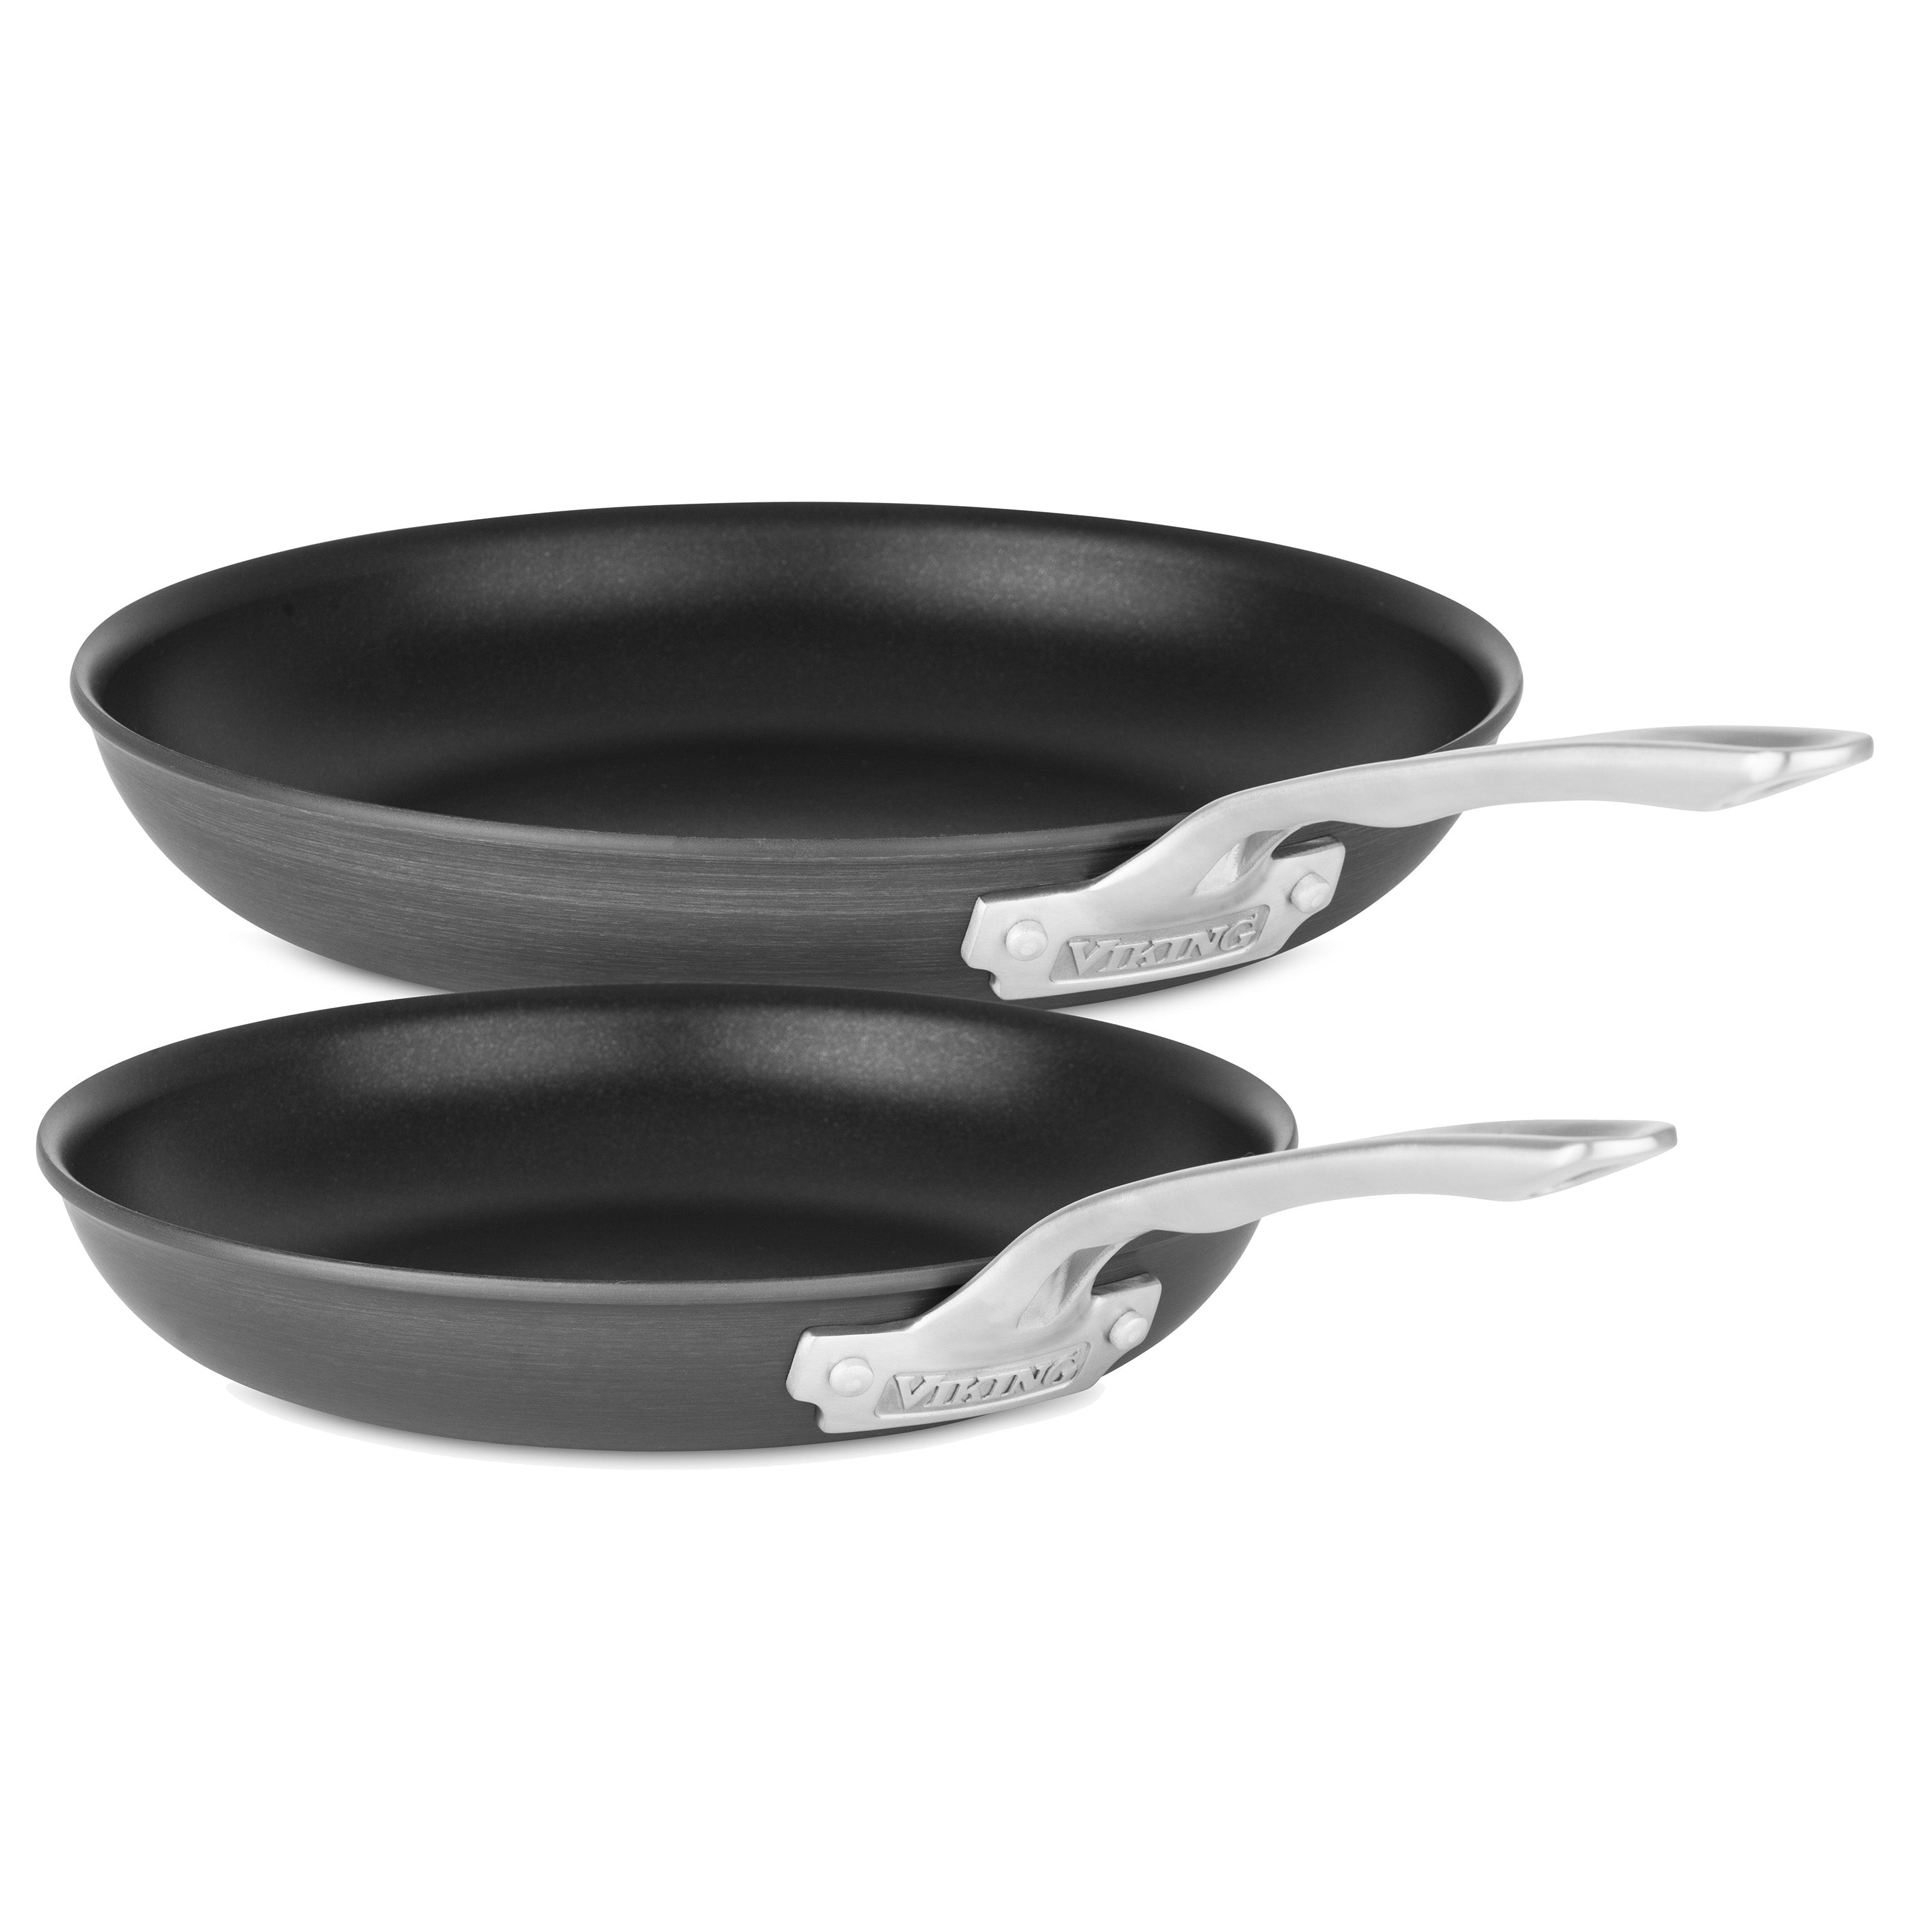 ALL CLAD 8 Inch Frying Pan B1 Nonstick Hard Anodized Induction 3